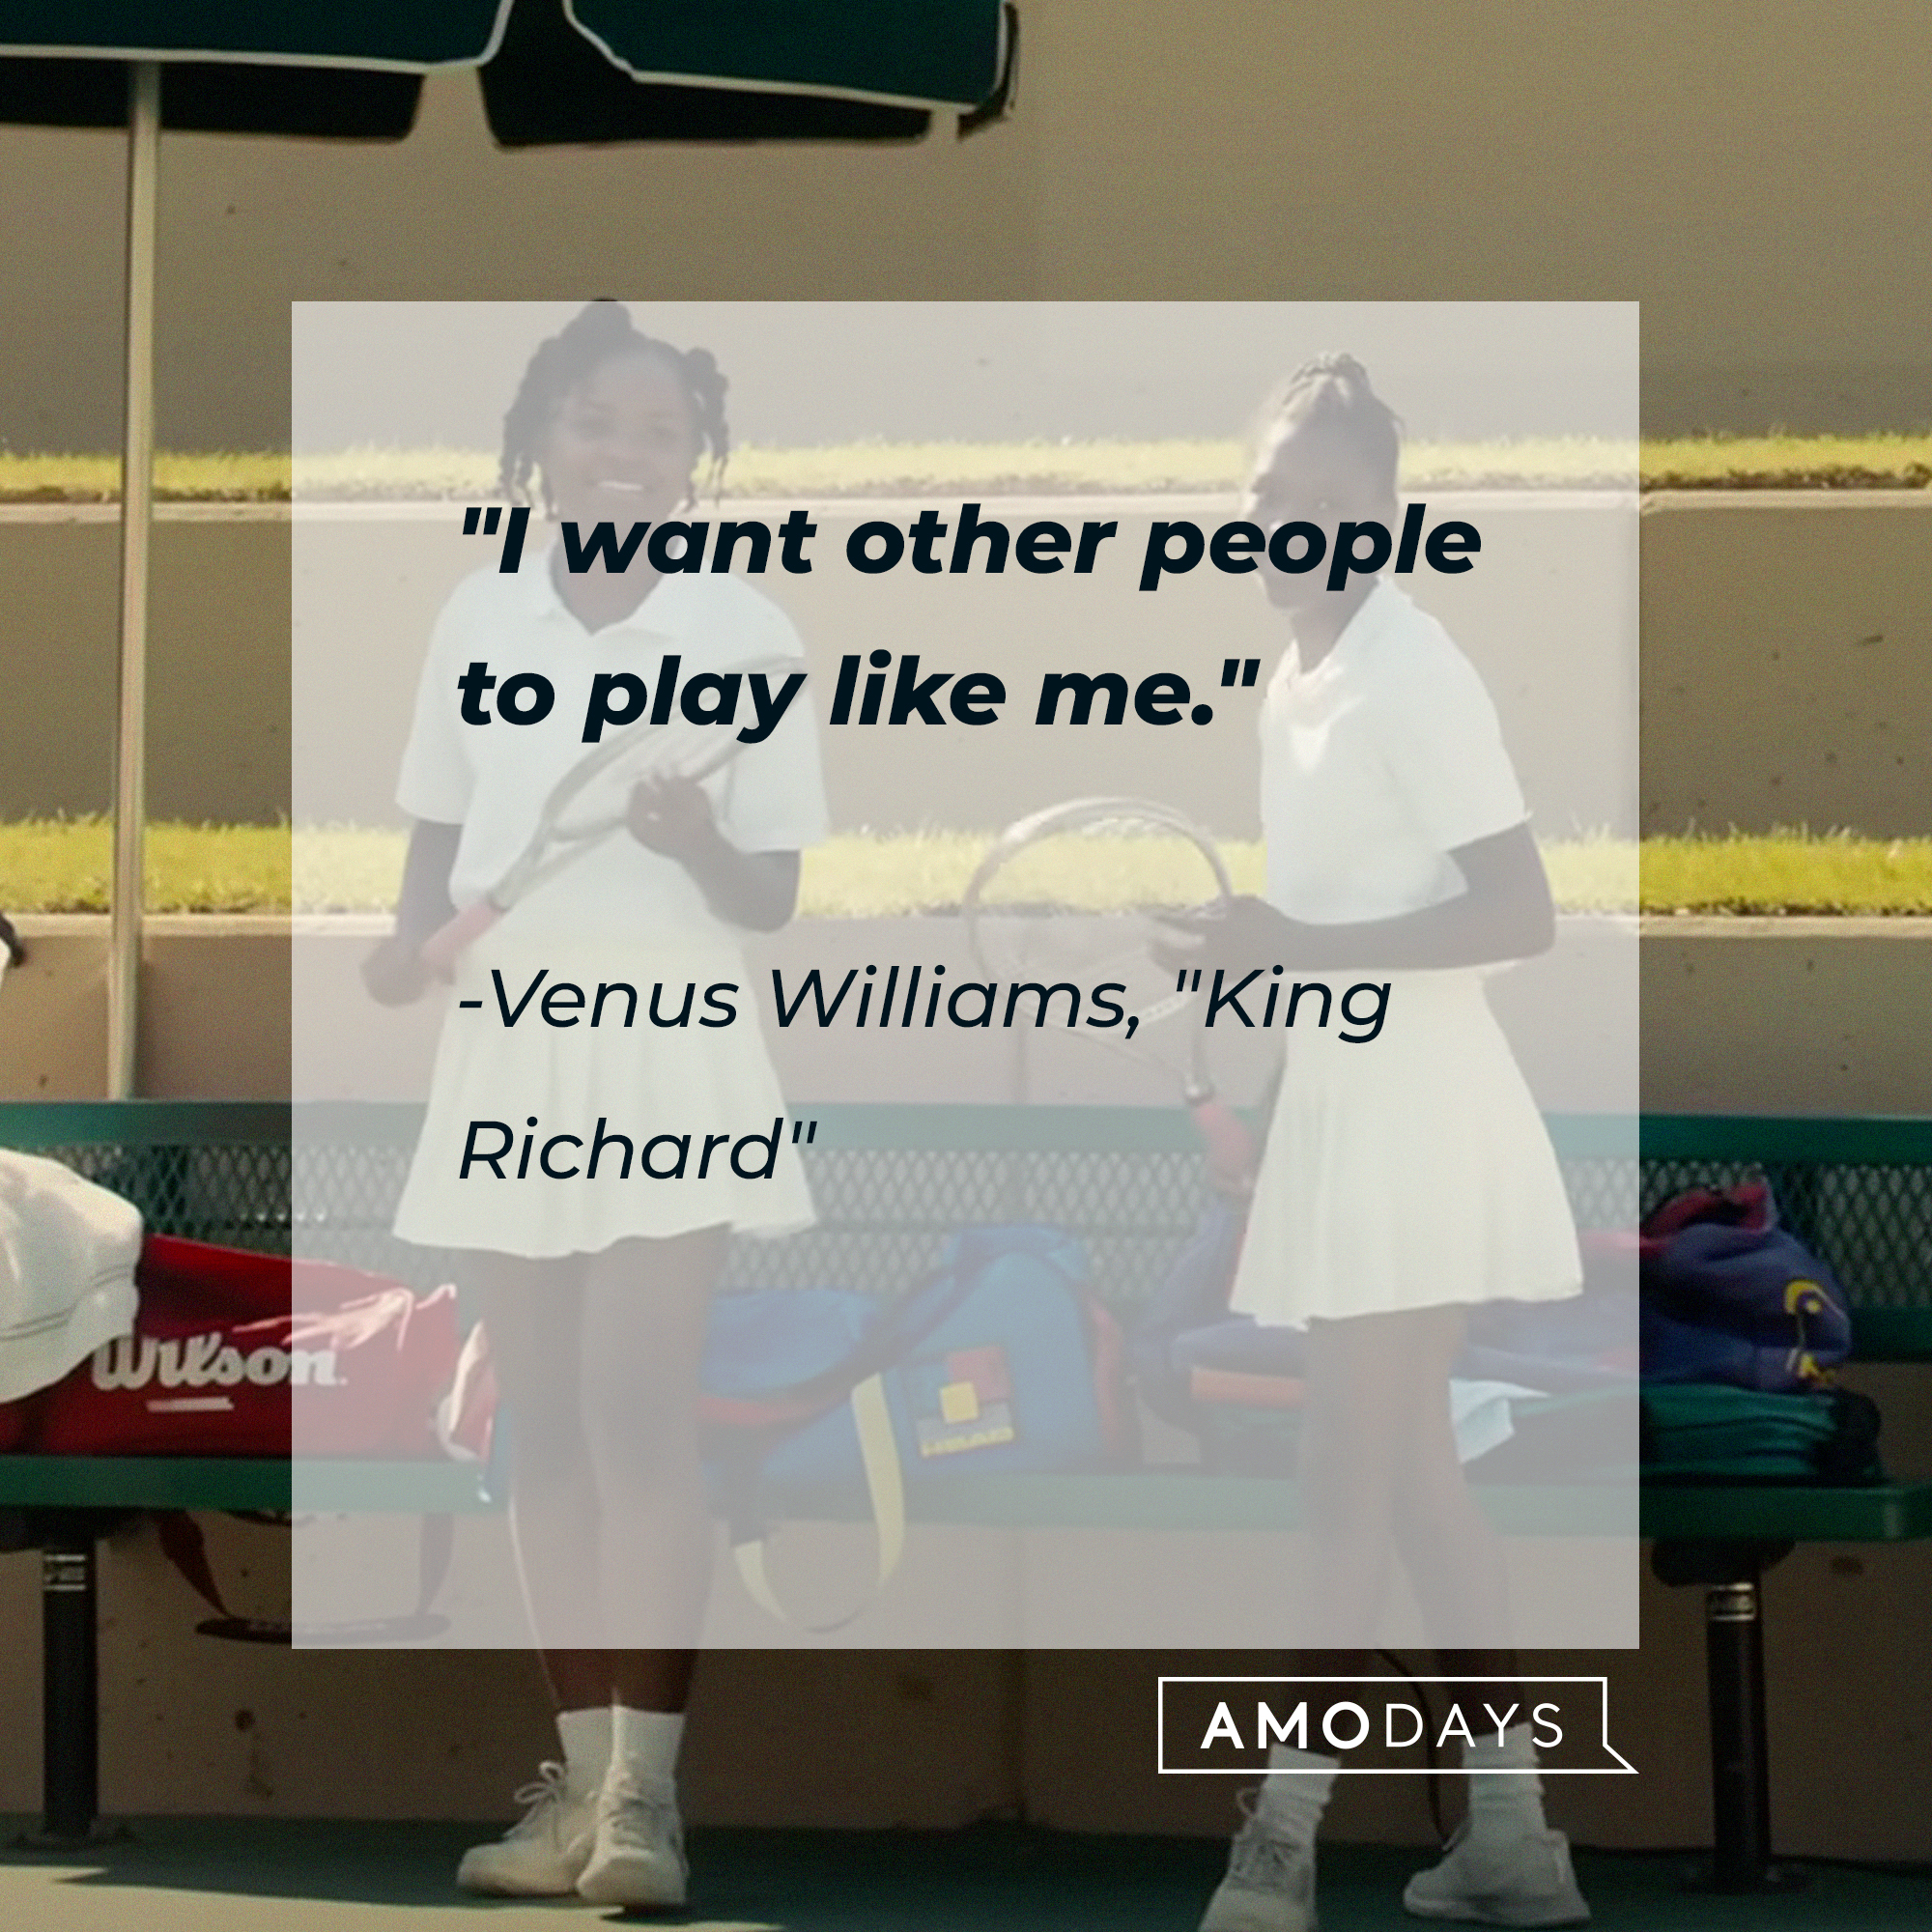 Venus Williams‘ quote: "I want other people to play like me." | Image: youtube.com/WarnerBrosPictures